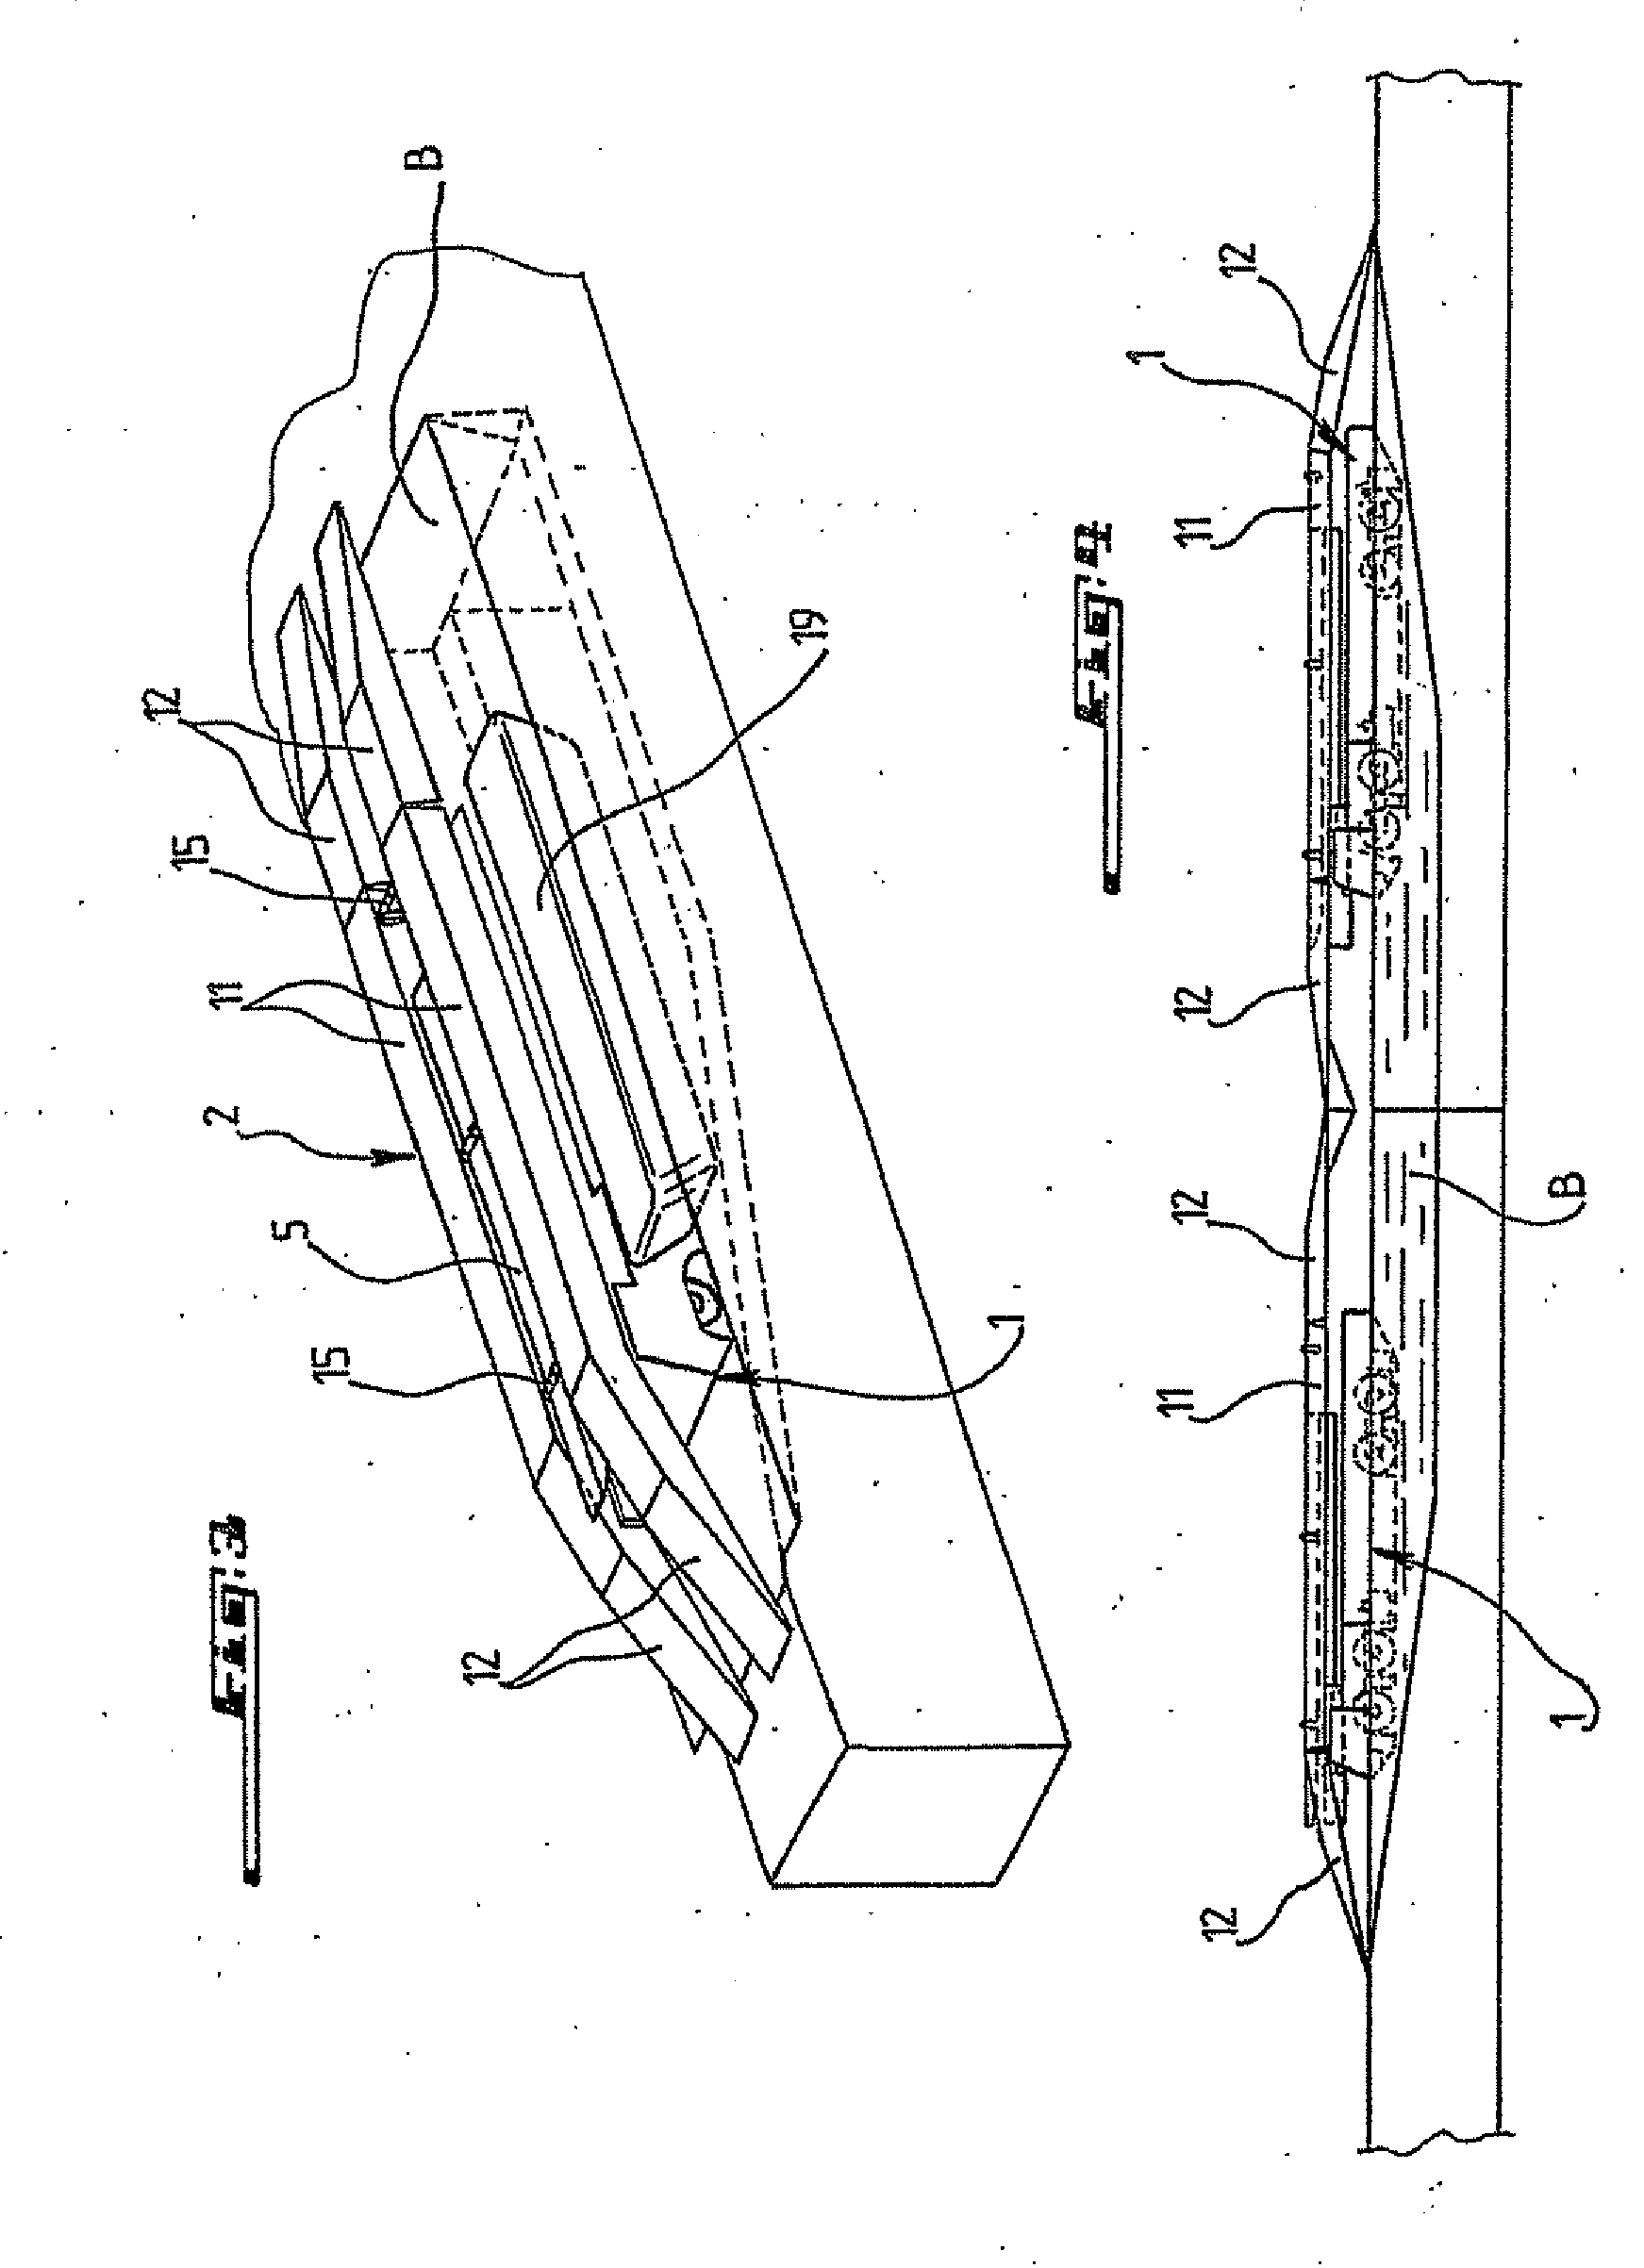 System for transporting a span on a road vehicle capable of being transformed into an amphibious vehicle enabling the crossing of a dry or water-filled gap by any road vehicle